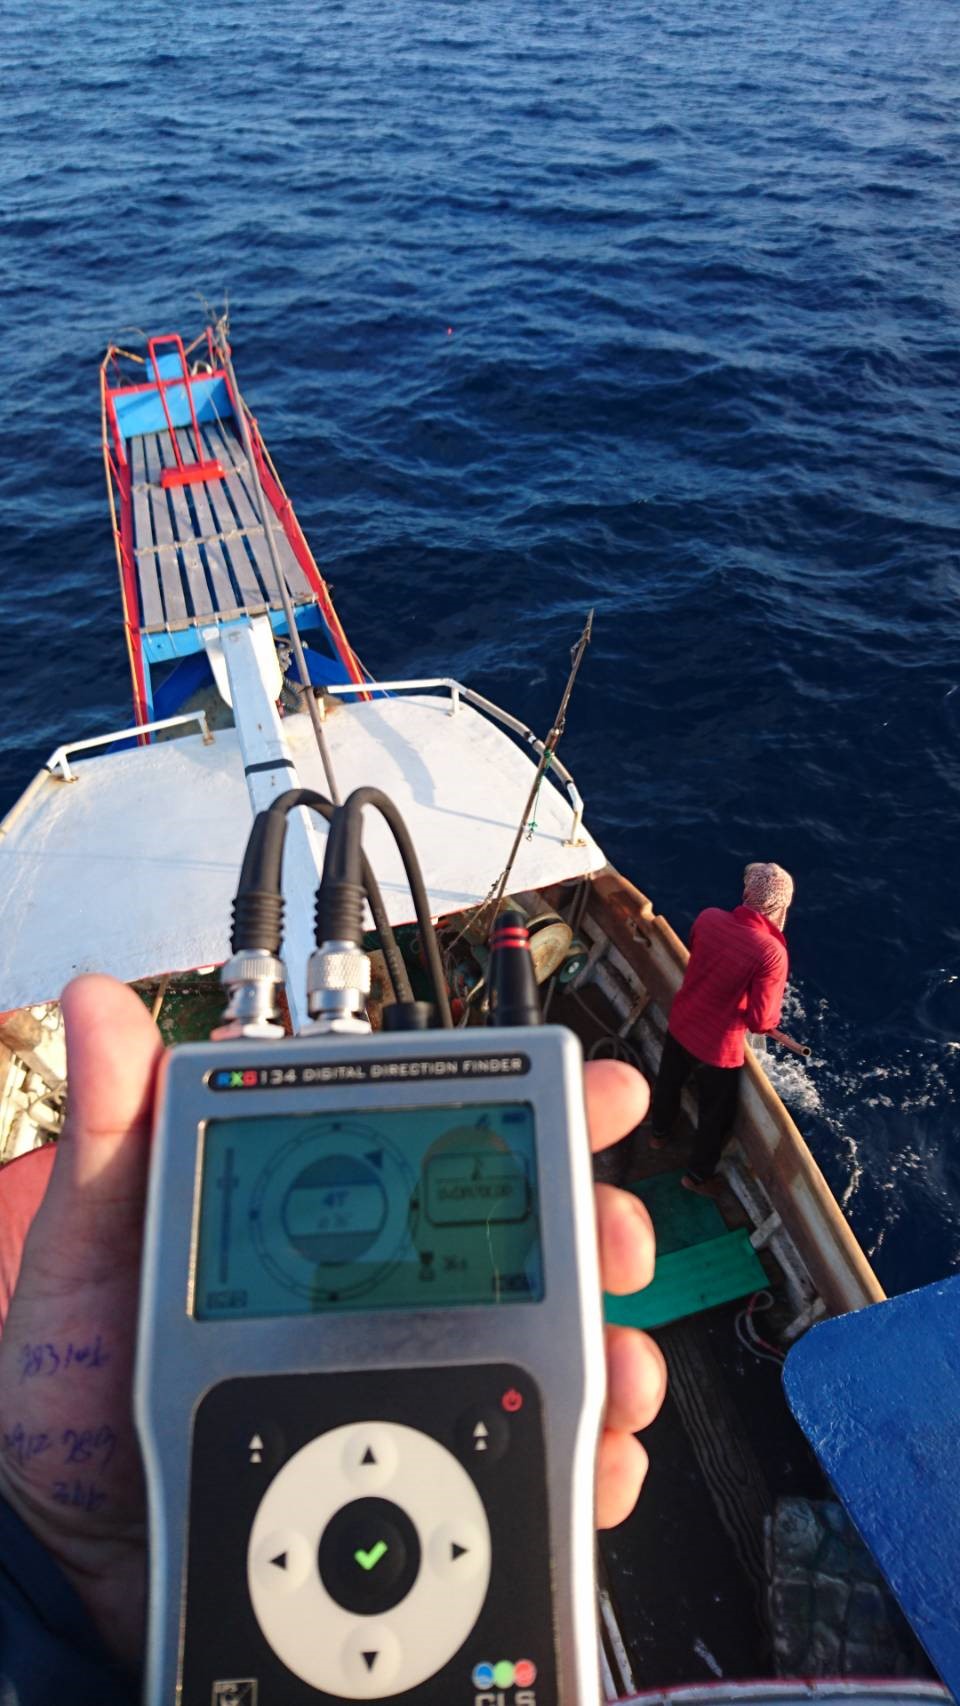 The goniometer screen, having found the tag signal. Credits Tuna and Billfish Tagging Project in Taiwan